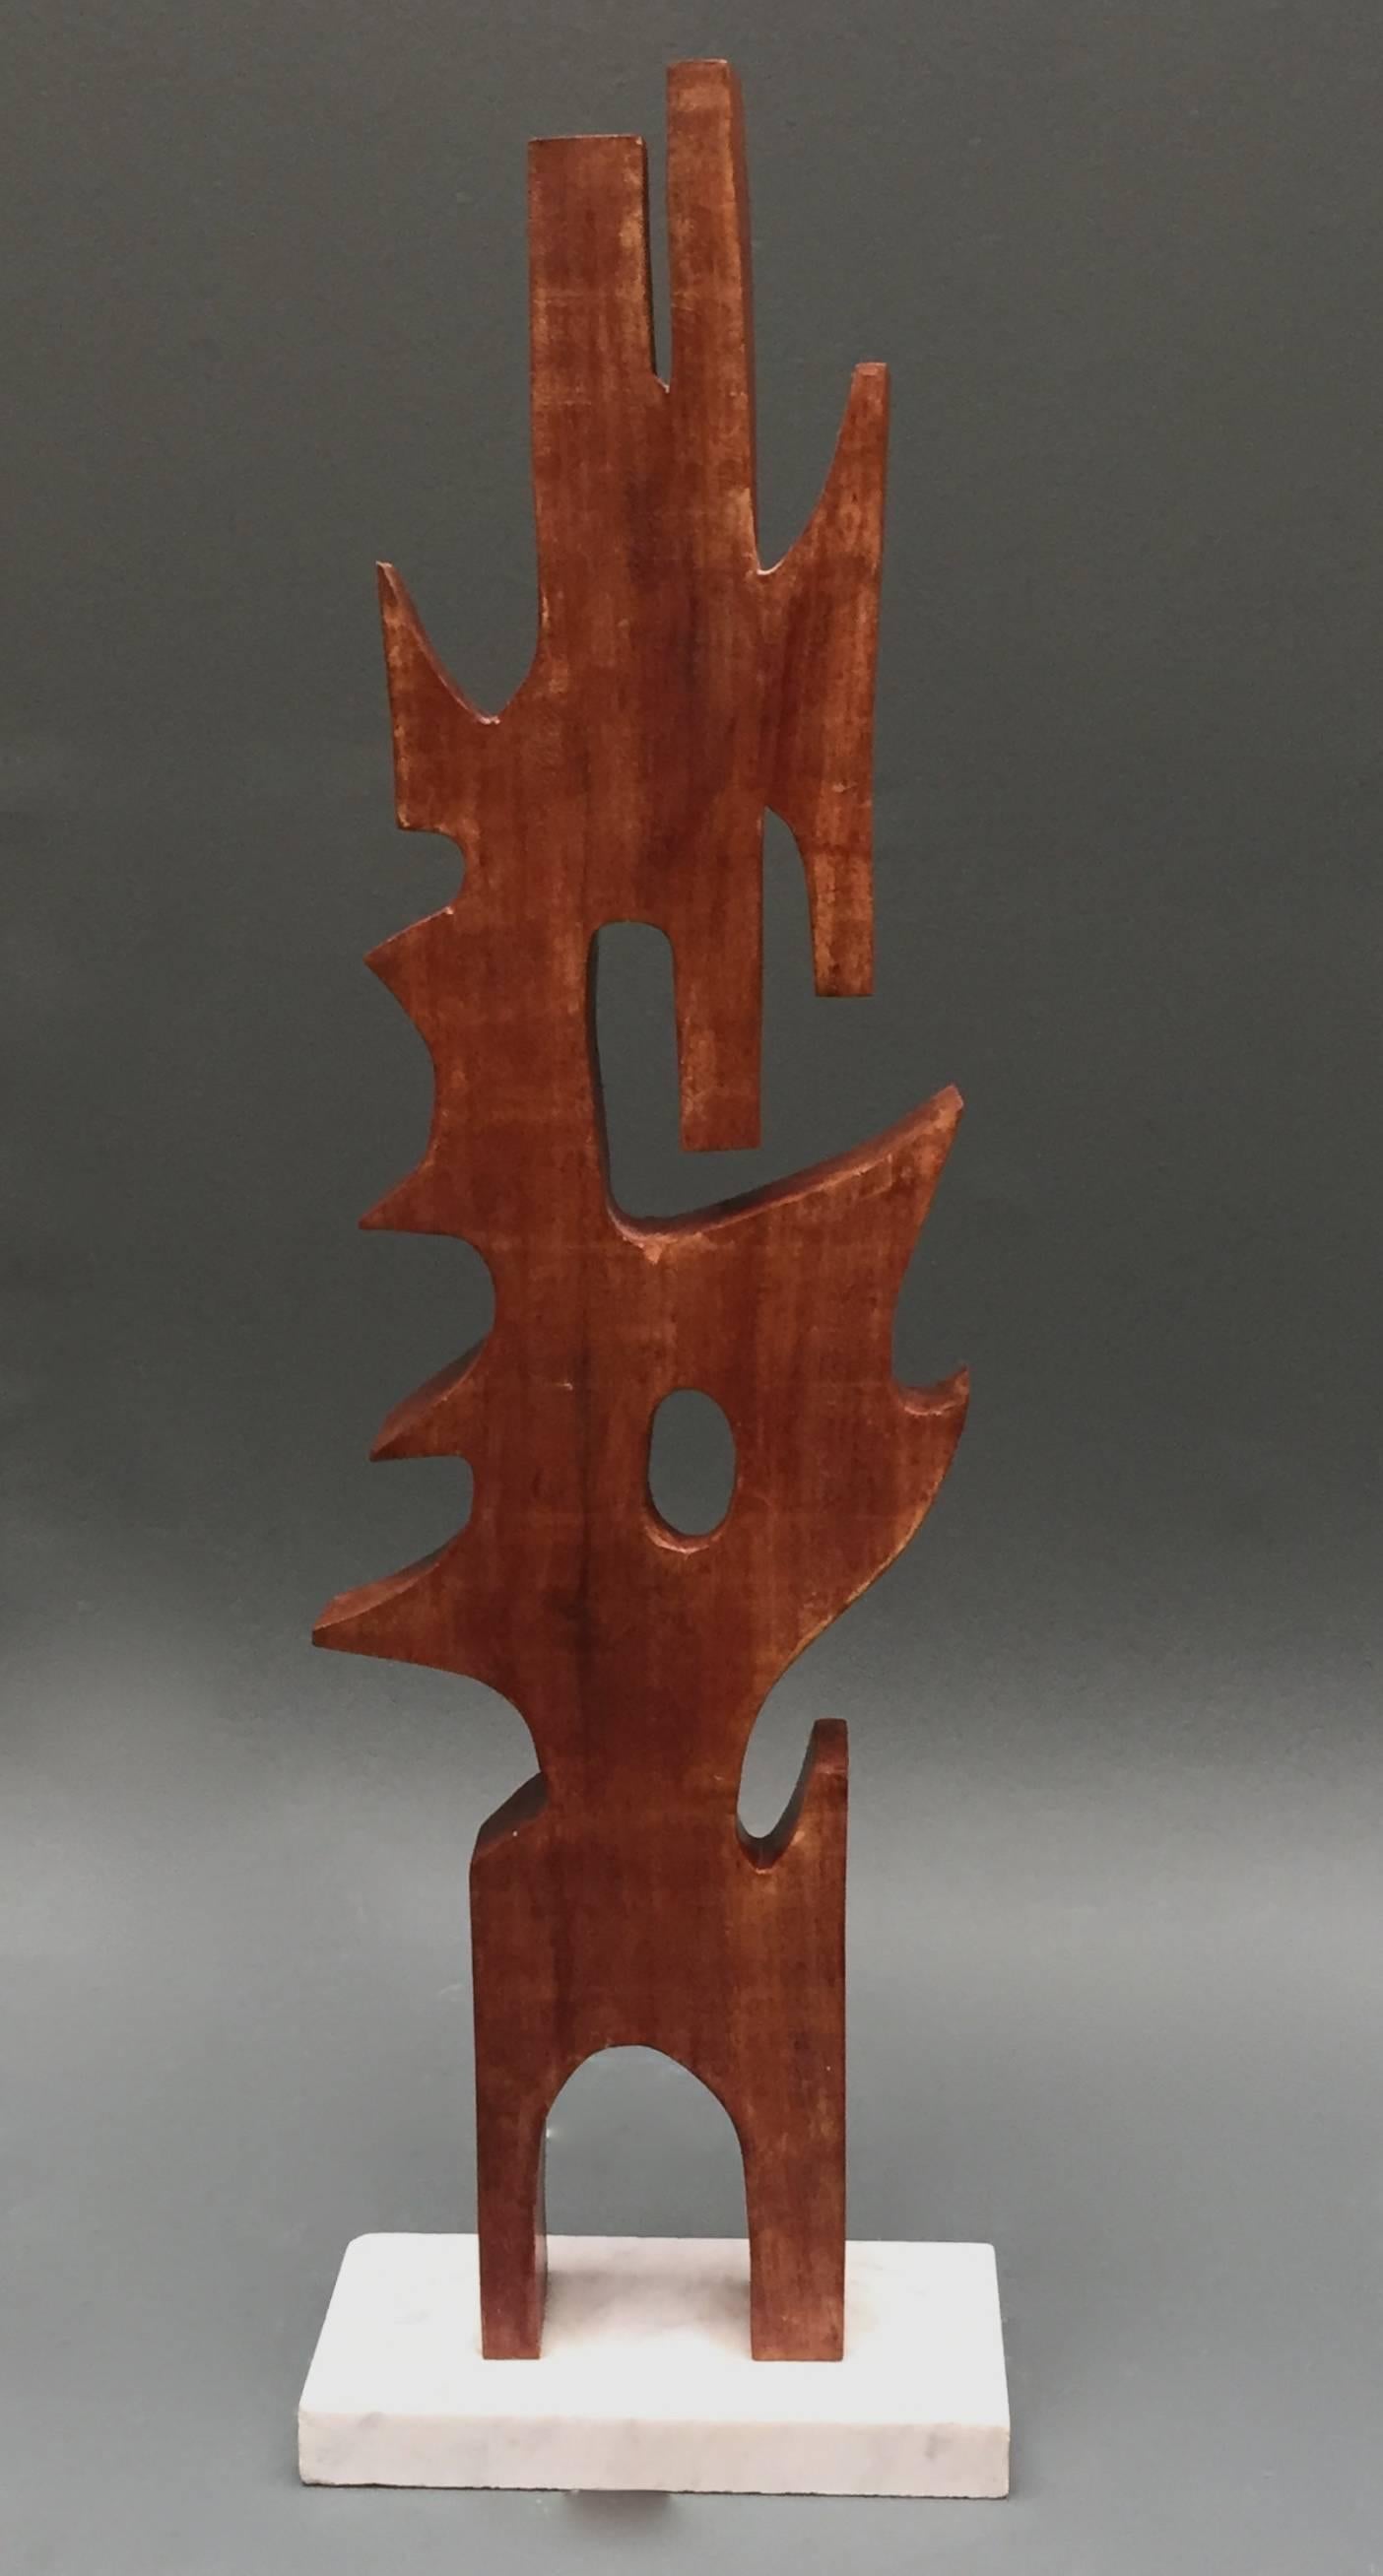 Hand-Carved Carved Wood Mid-Century Modern Abstract Statue by Jan Sergeant